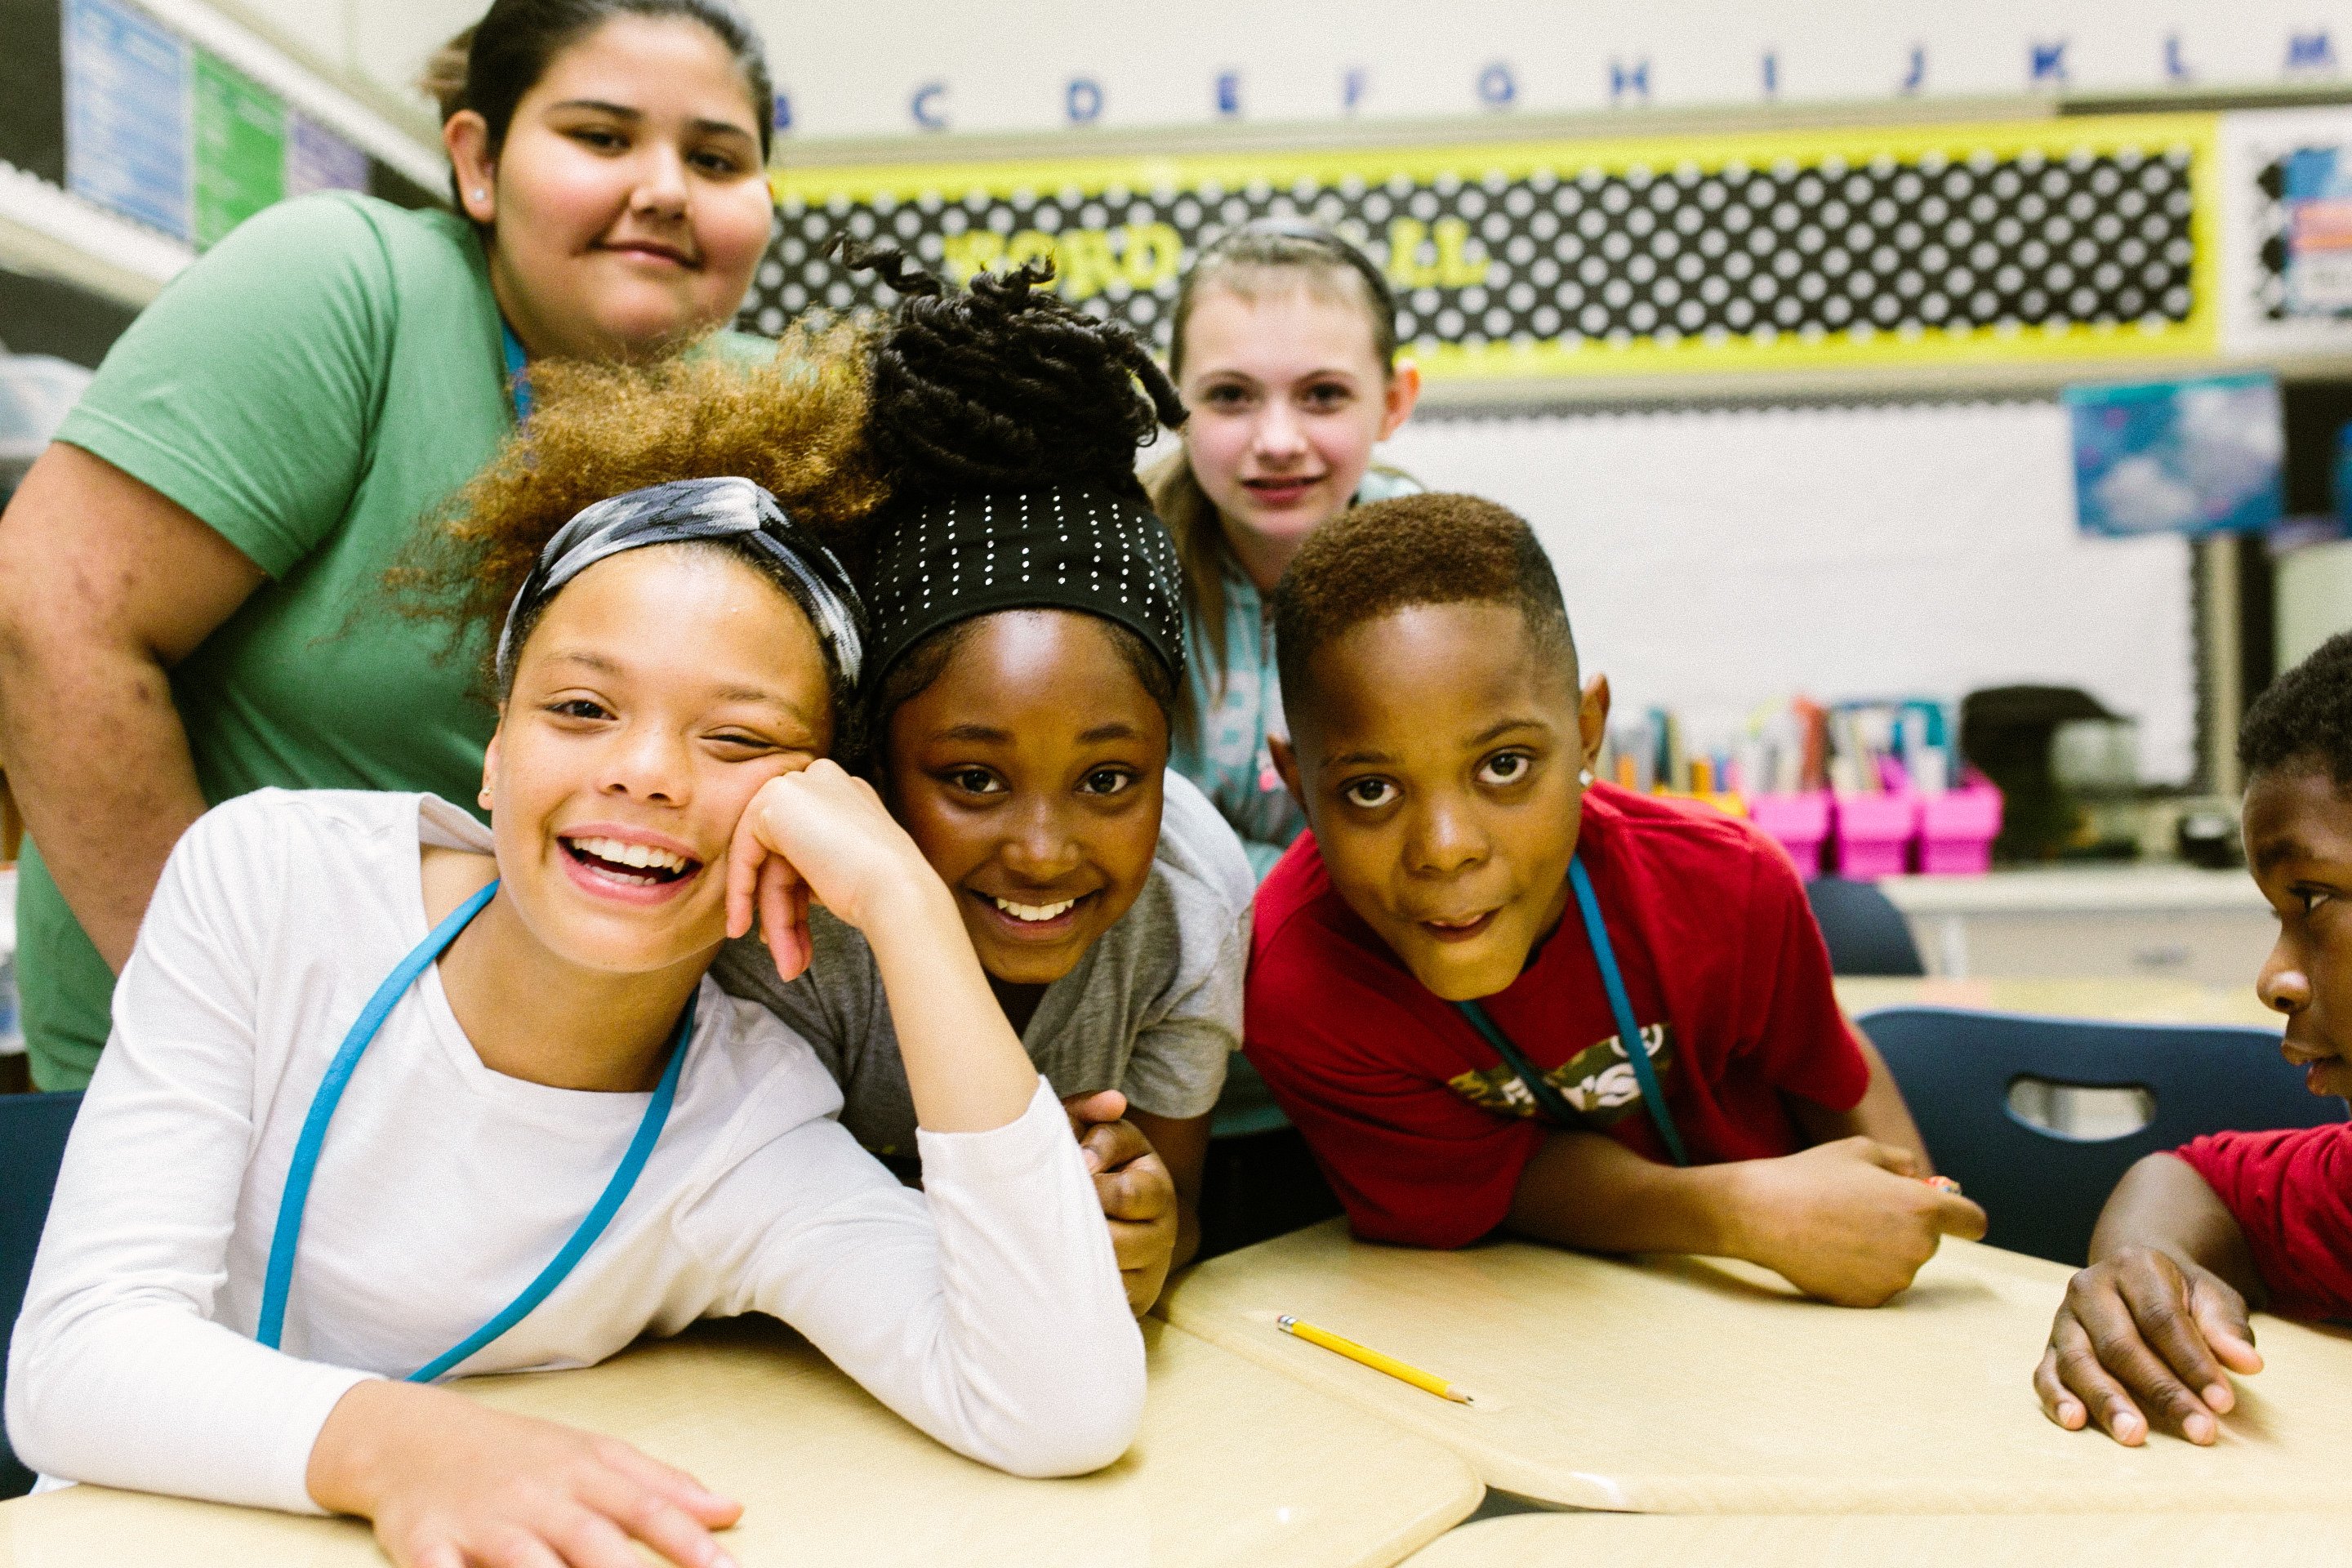 Kids smiling at classroom table